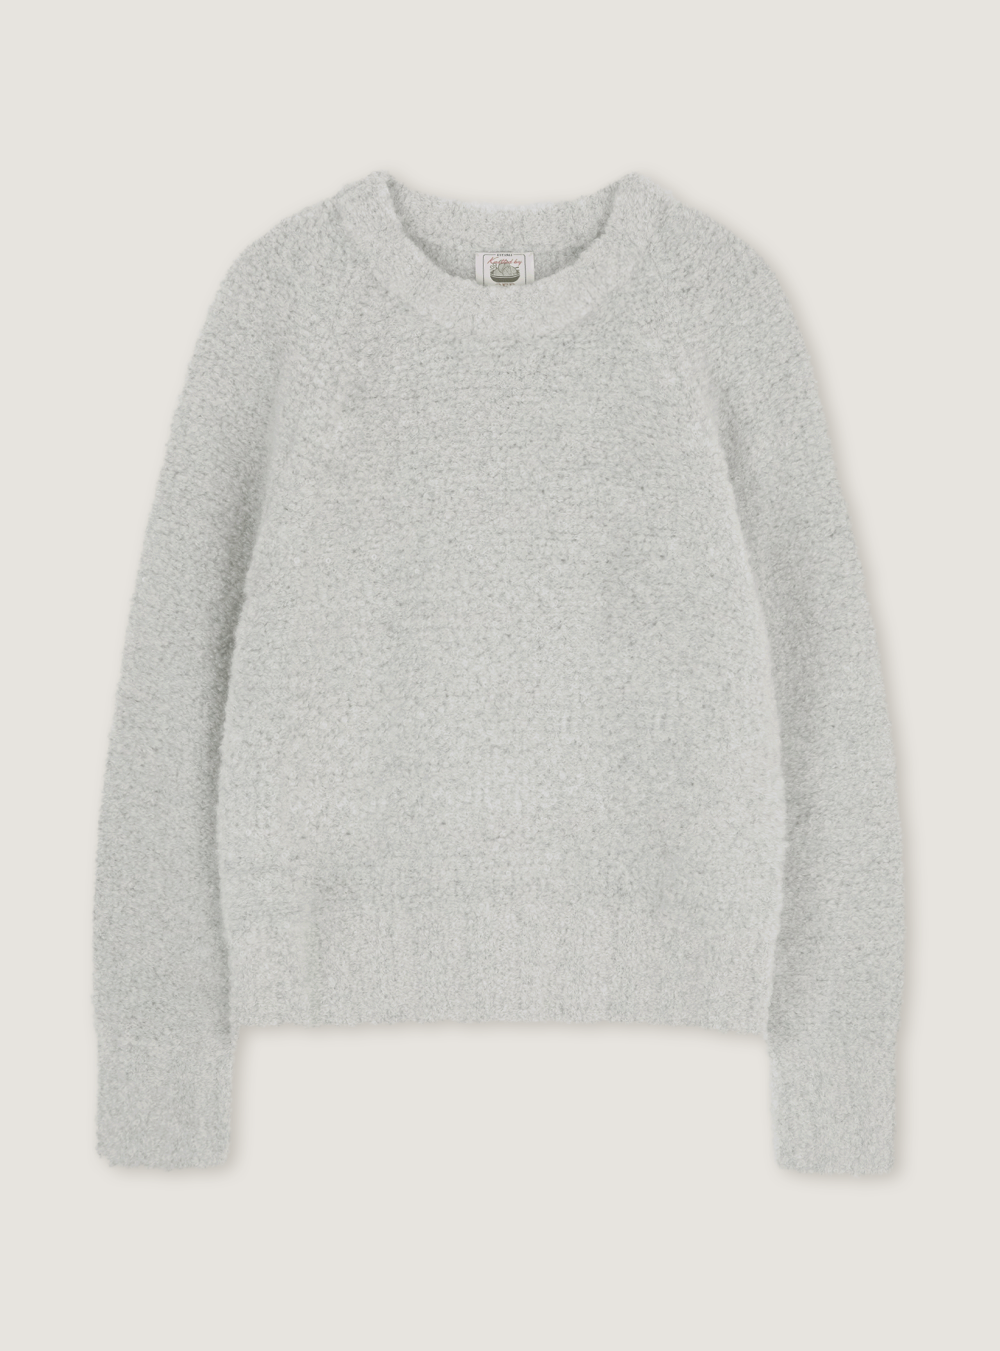 BOUCLE ROUND PULLOVER - GRAY